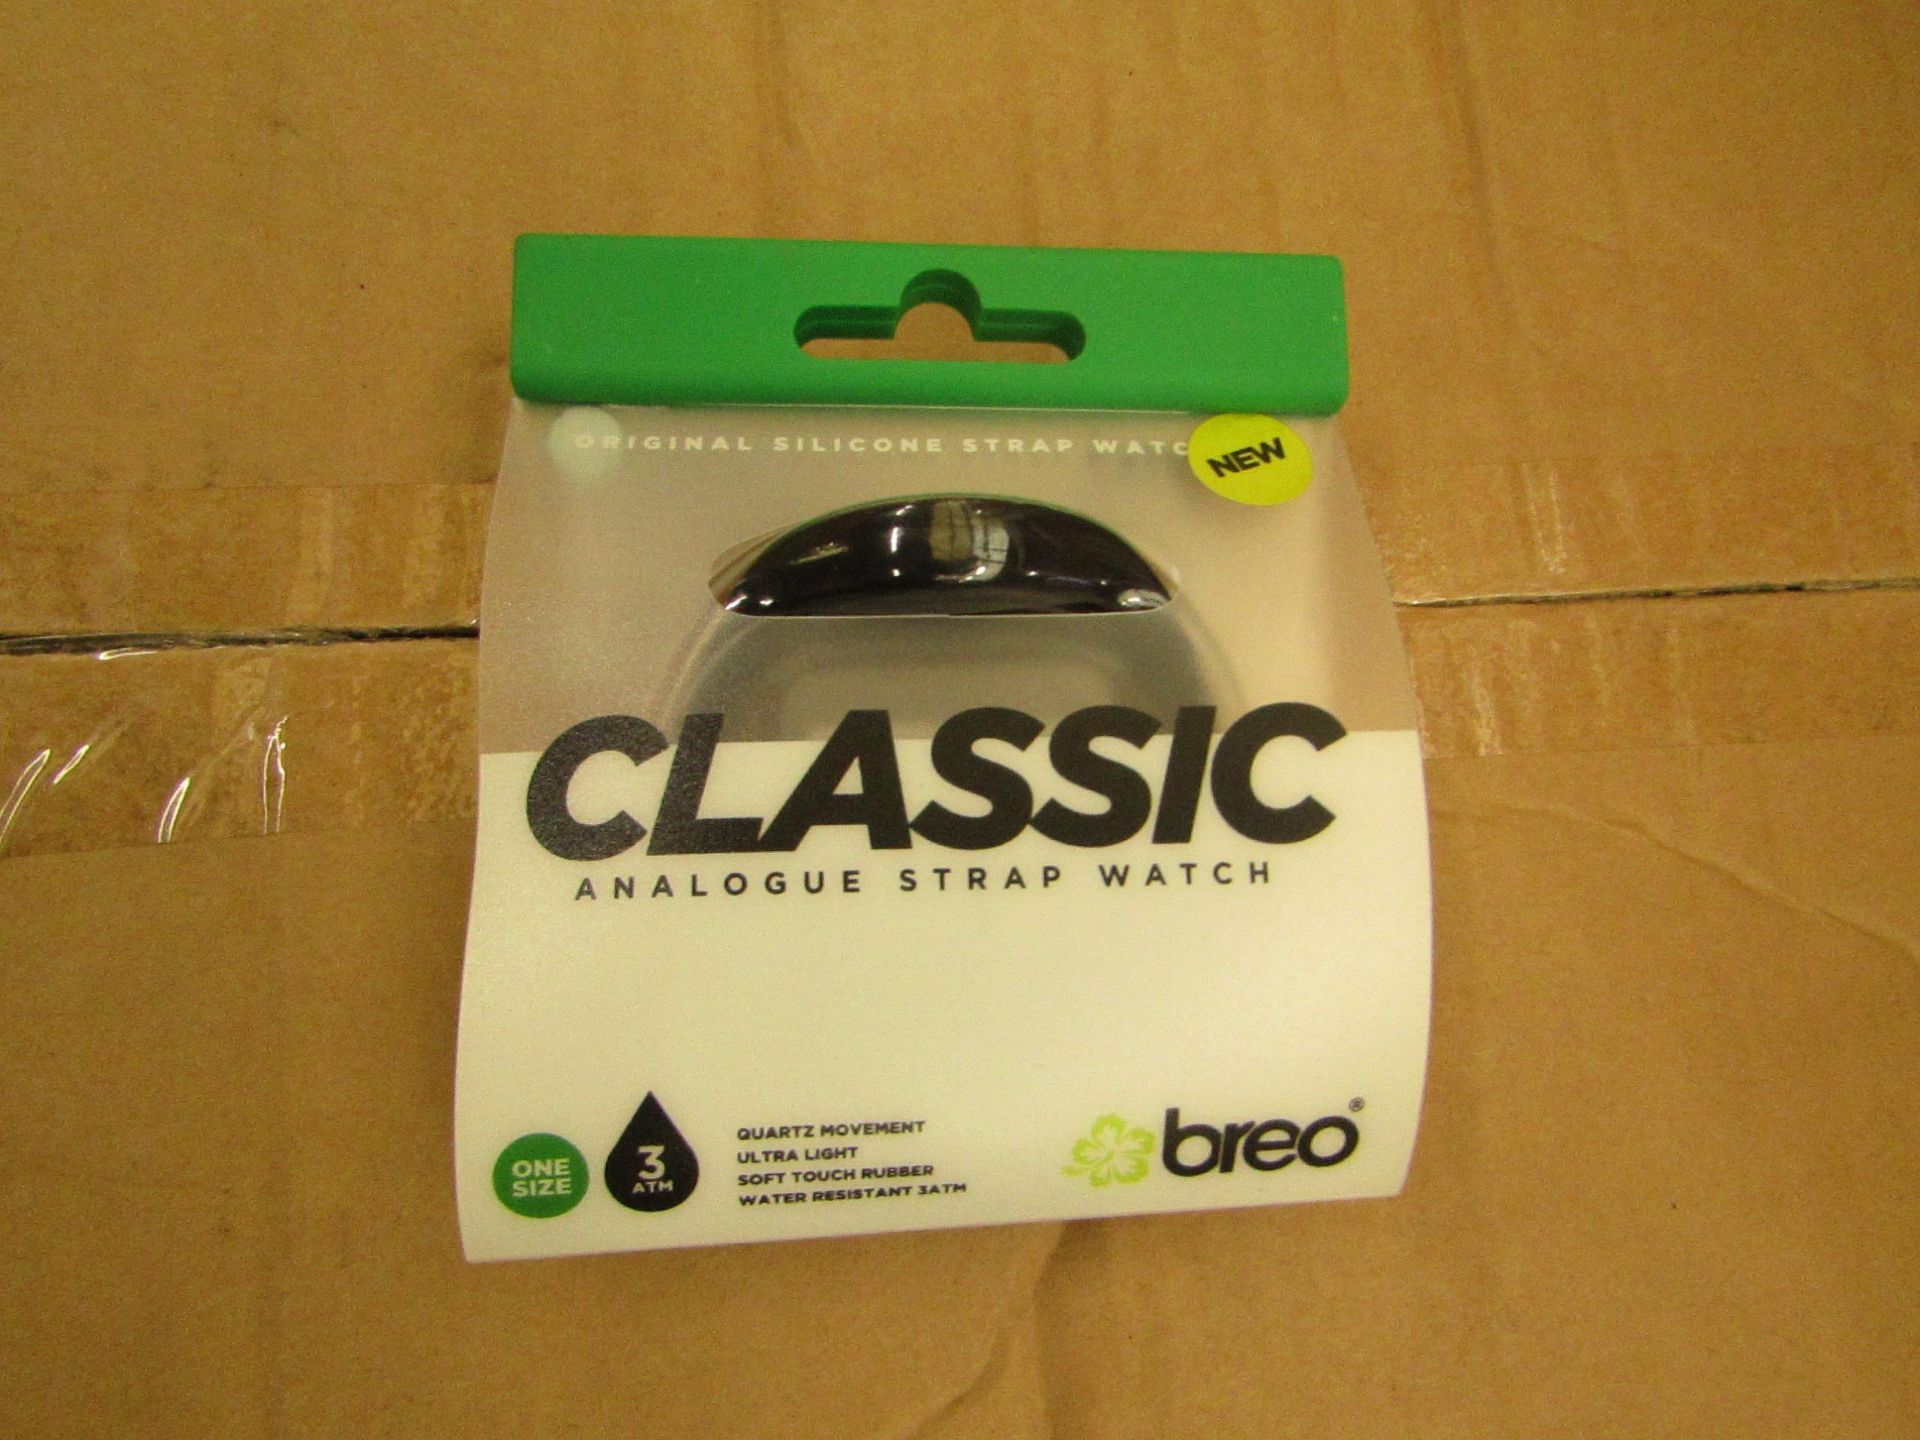 6 x Breo Classic Analogue Strap Watch. Packaged